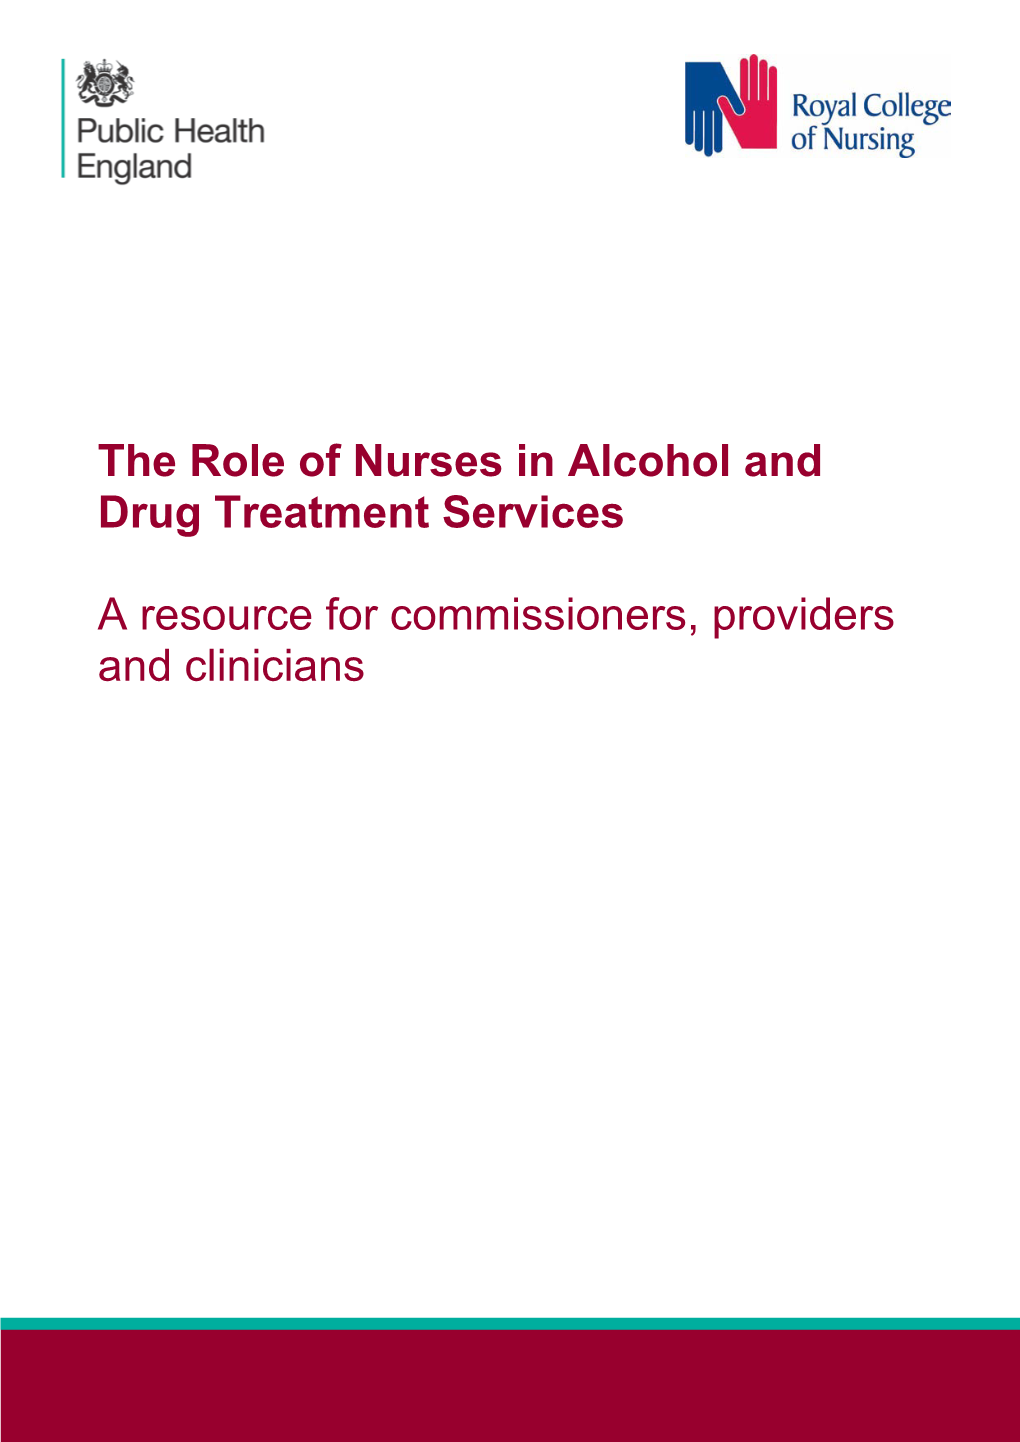 The Role of Nurses in Alcohol and Drug Treatment Services